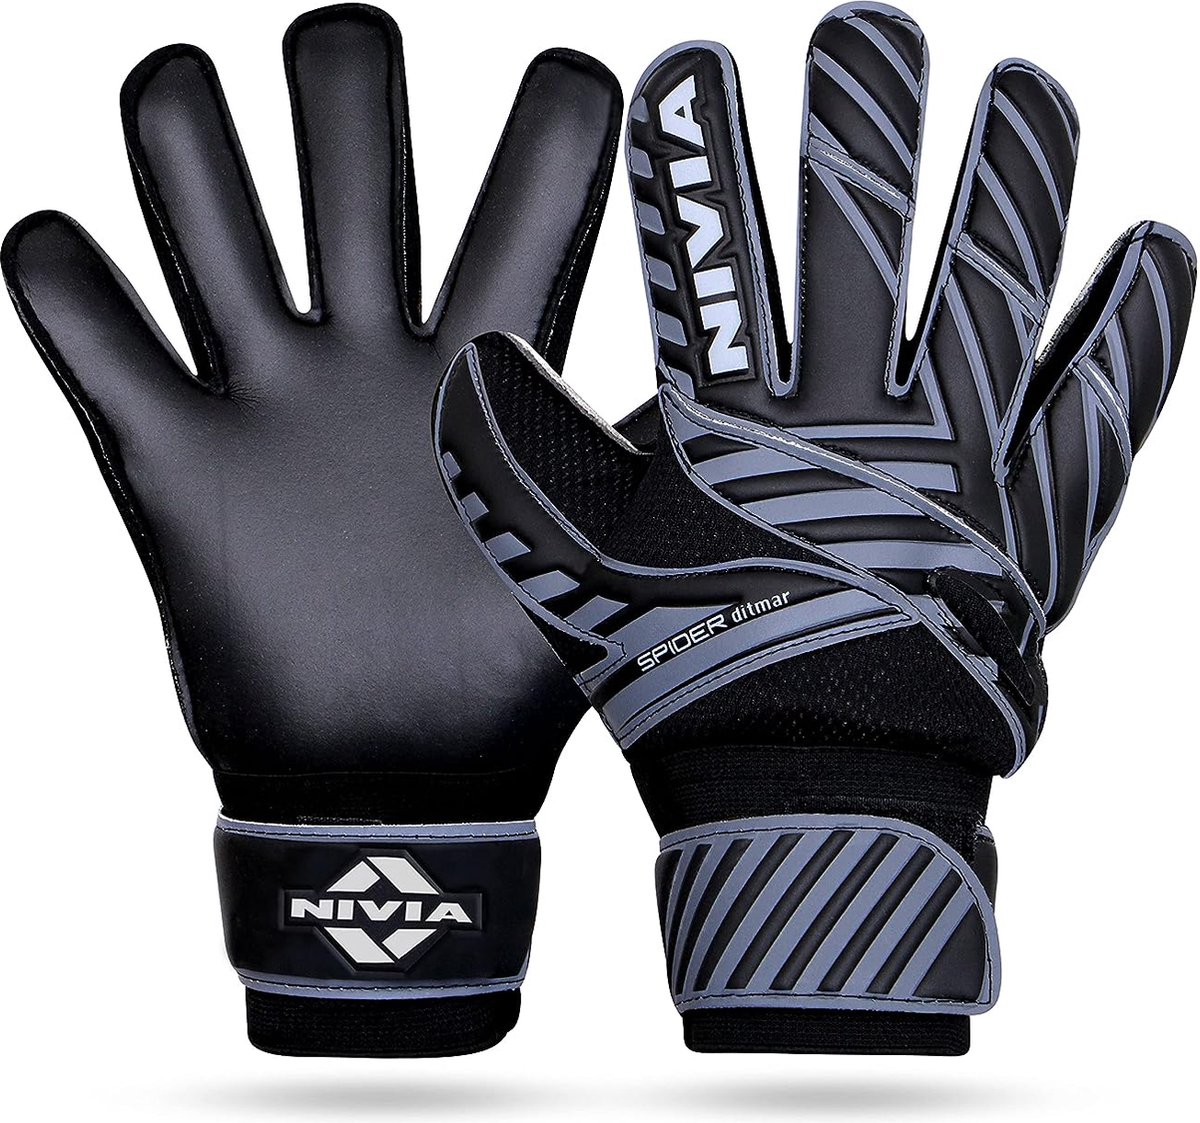 Nivia Ditmar Spider Goalkeeper Gloves for Mens & Womens (Black, Size-L) Material-Rubber | Comfortable Fit | ‎Extra Grip | Football Gloves